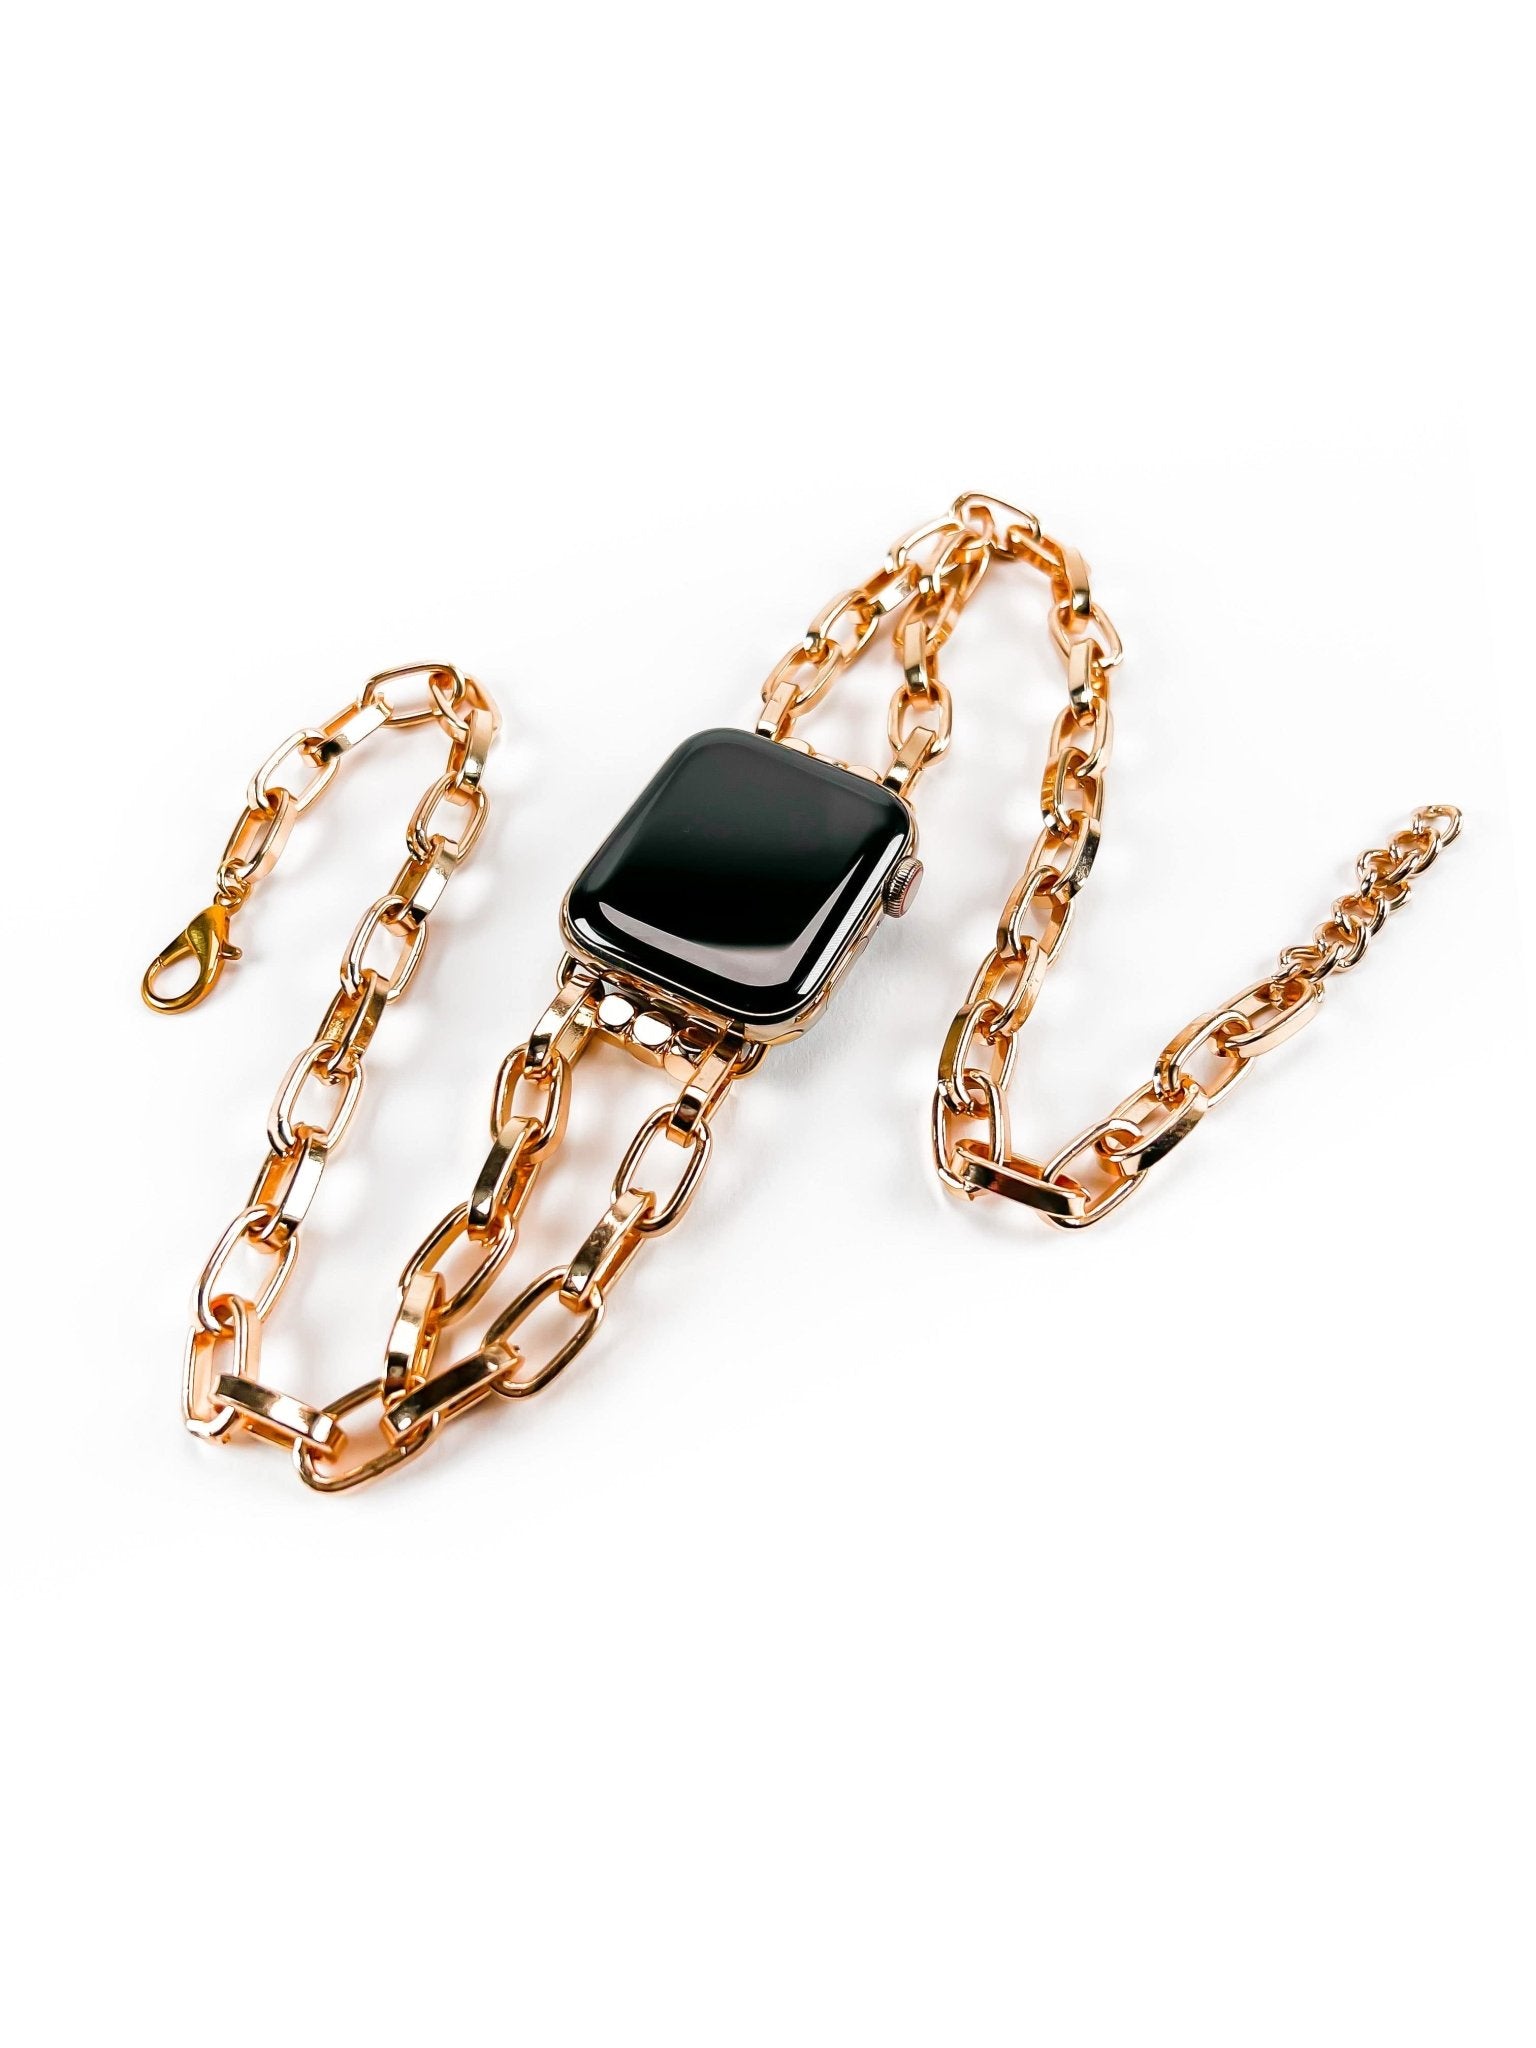 Gold Link Chain Watch Bracelet Band for Apple Watch - Mareevo